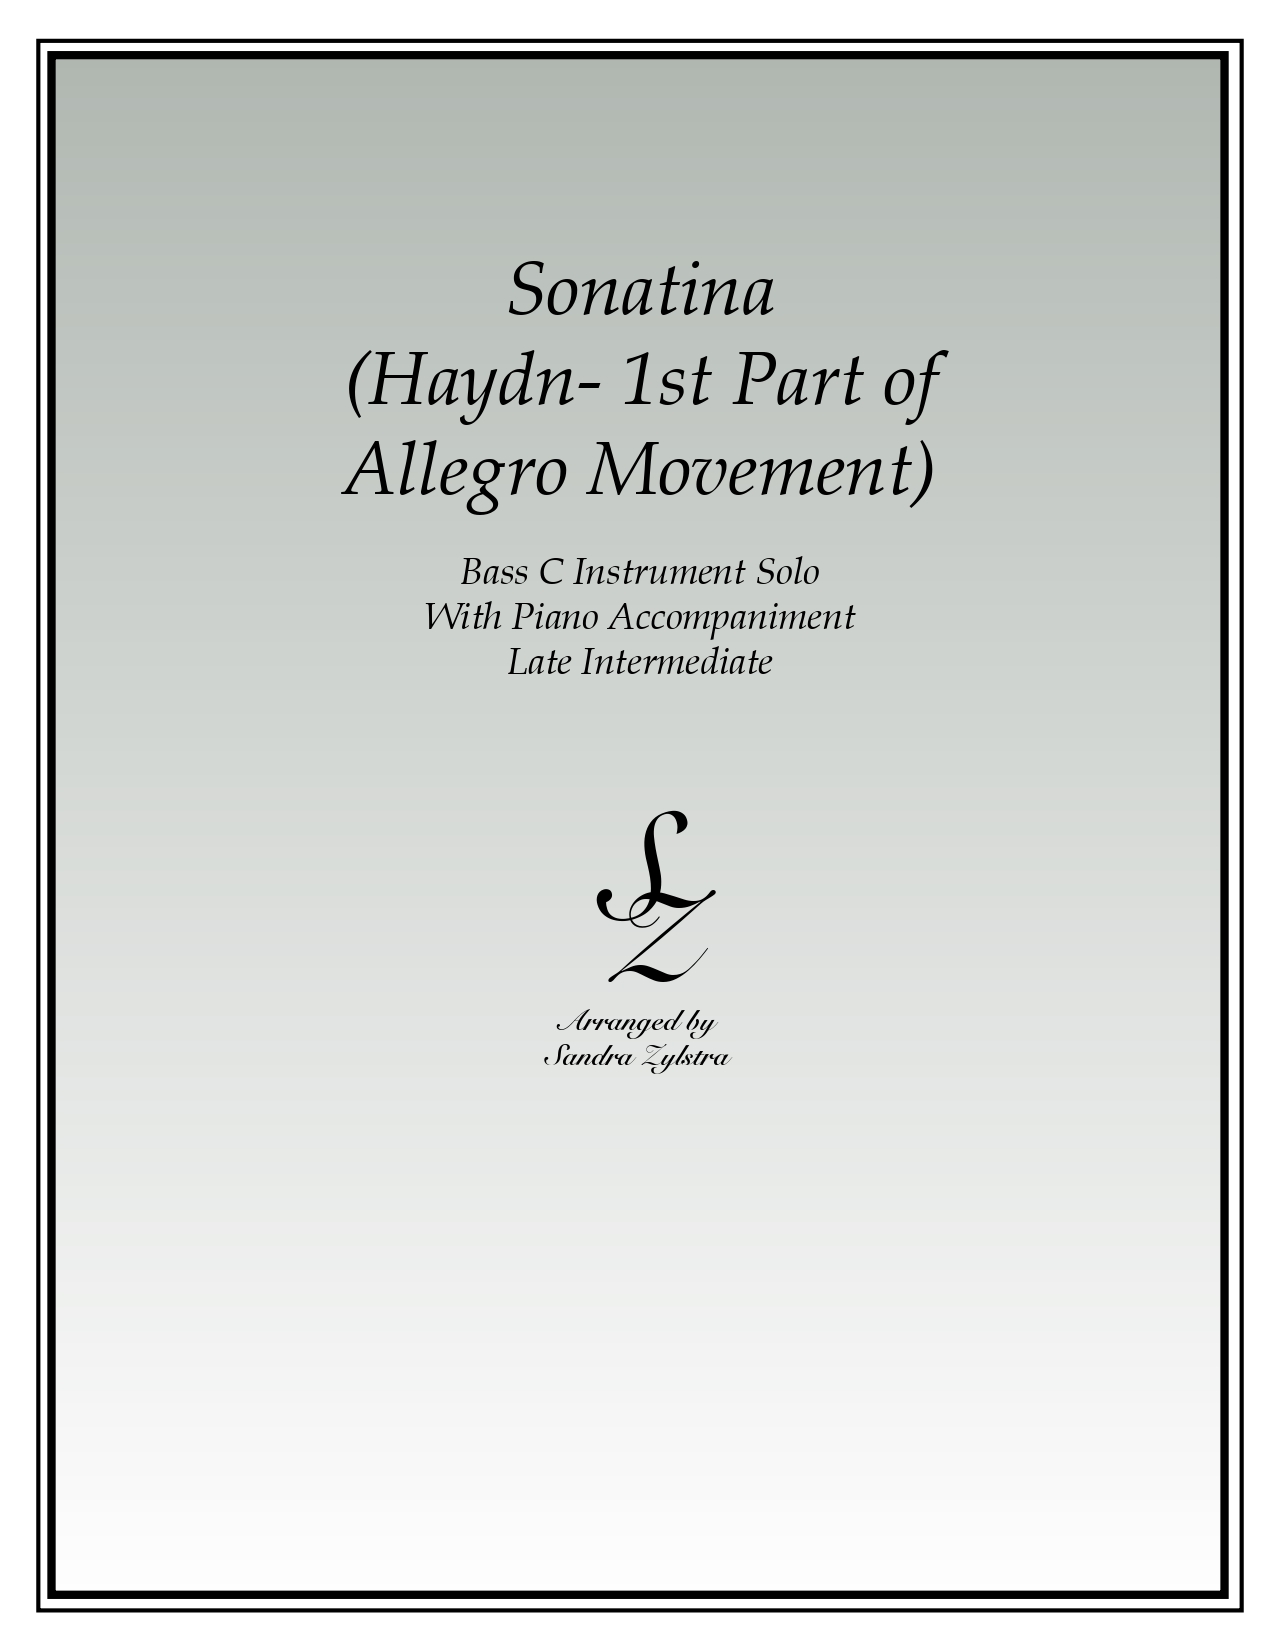 Sonatina Haydn bass C instrument solo part cover page 00011